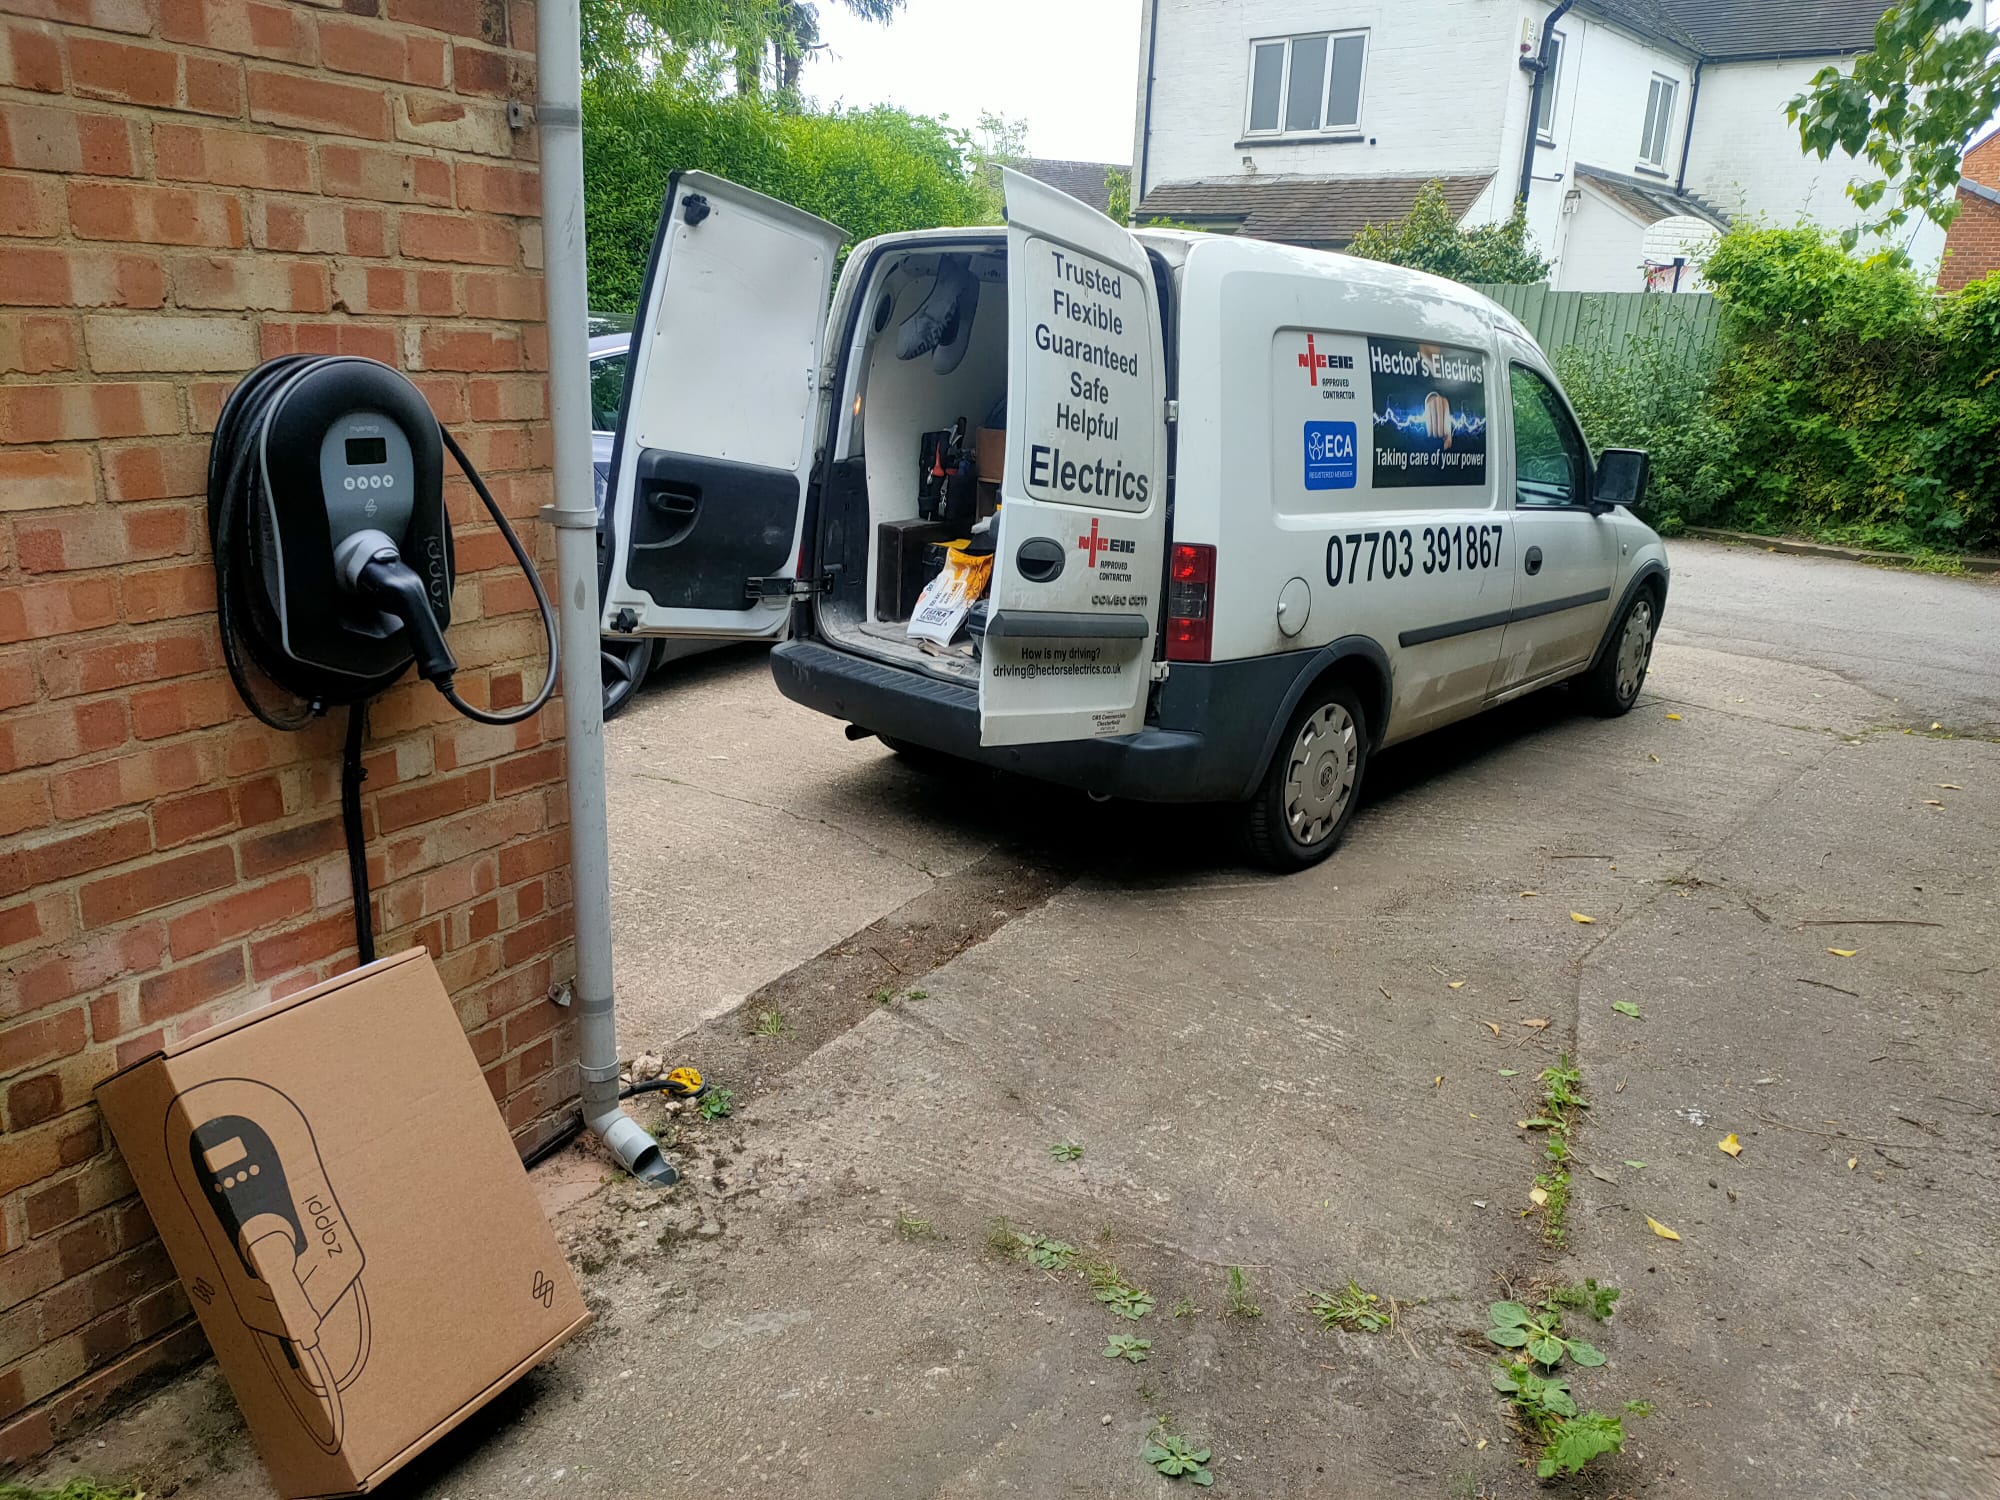 Next is an image of our van along with a EV Charger on the wall which we installed, the brand of EV charger is MyEnergi